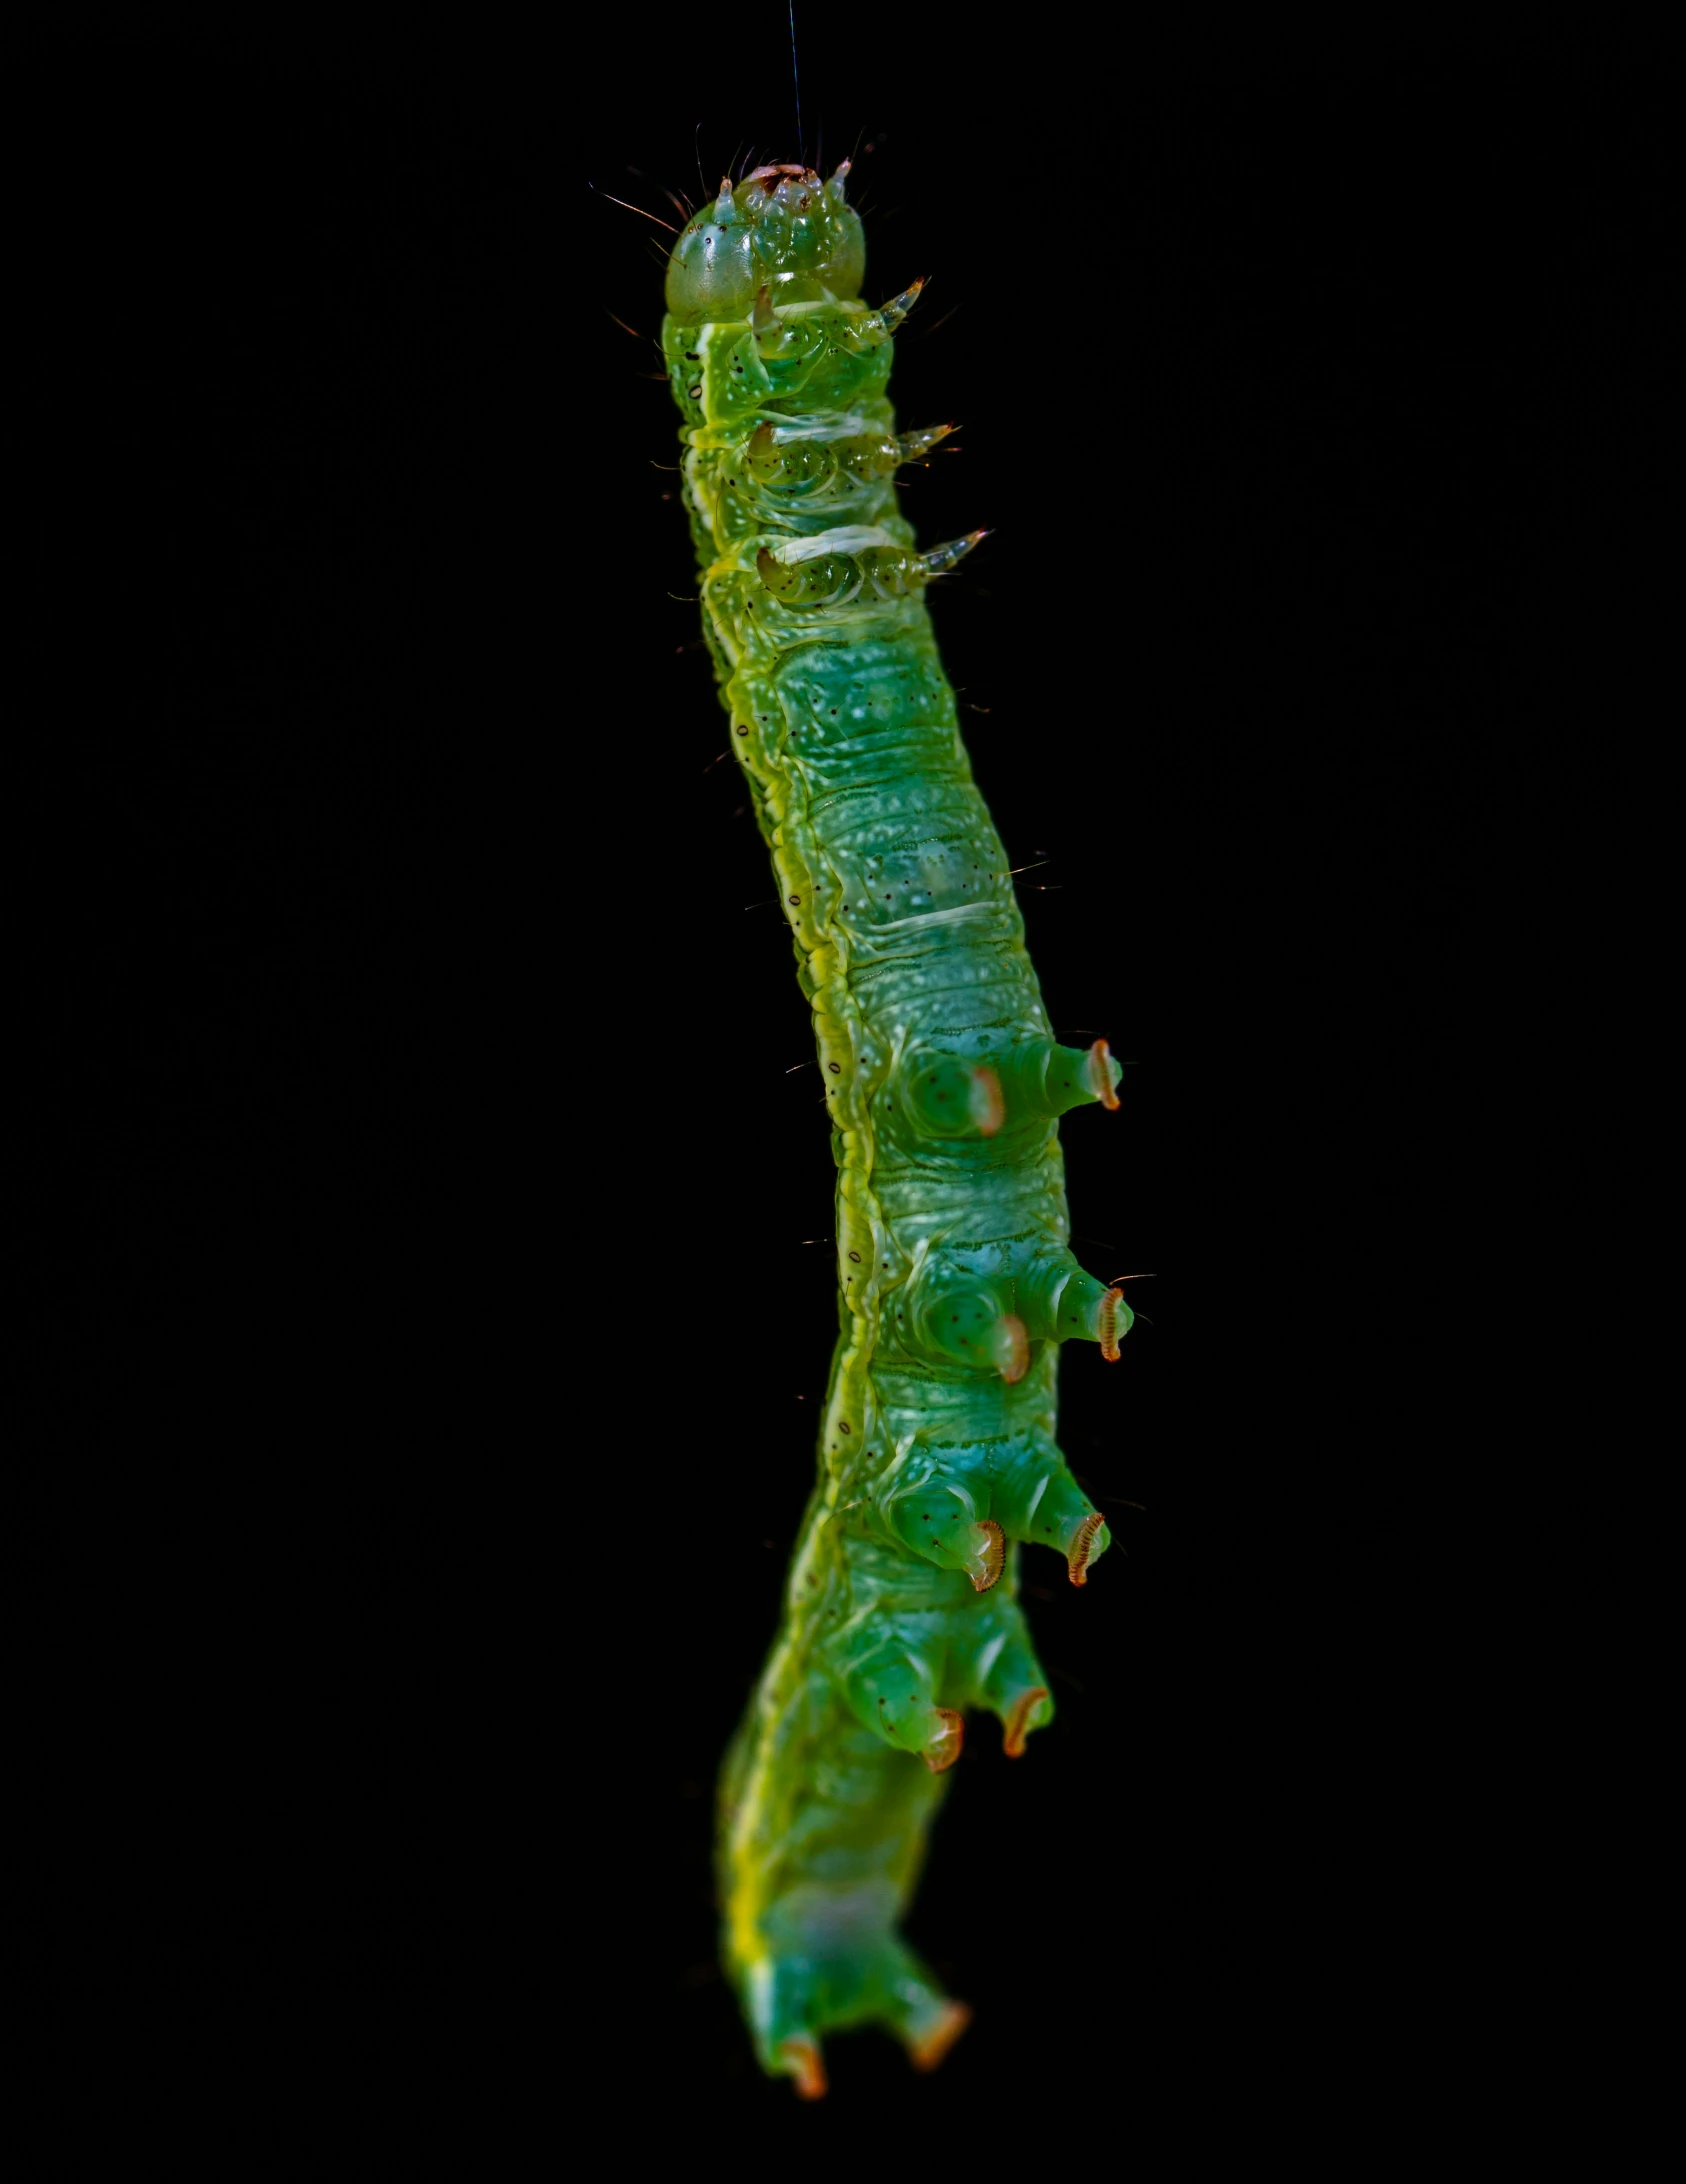 a green caterpillar on black background with light coming through the front